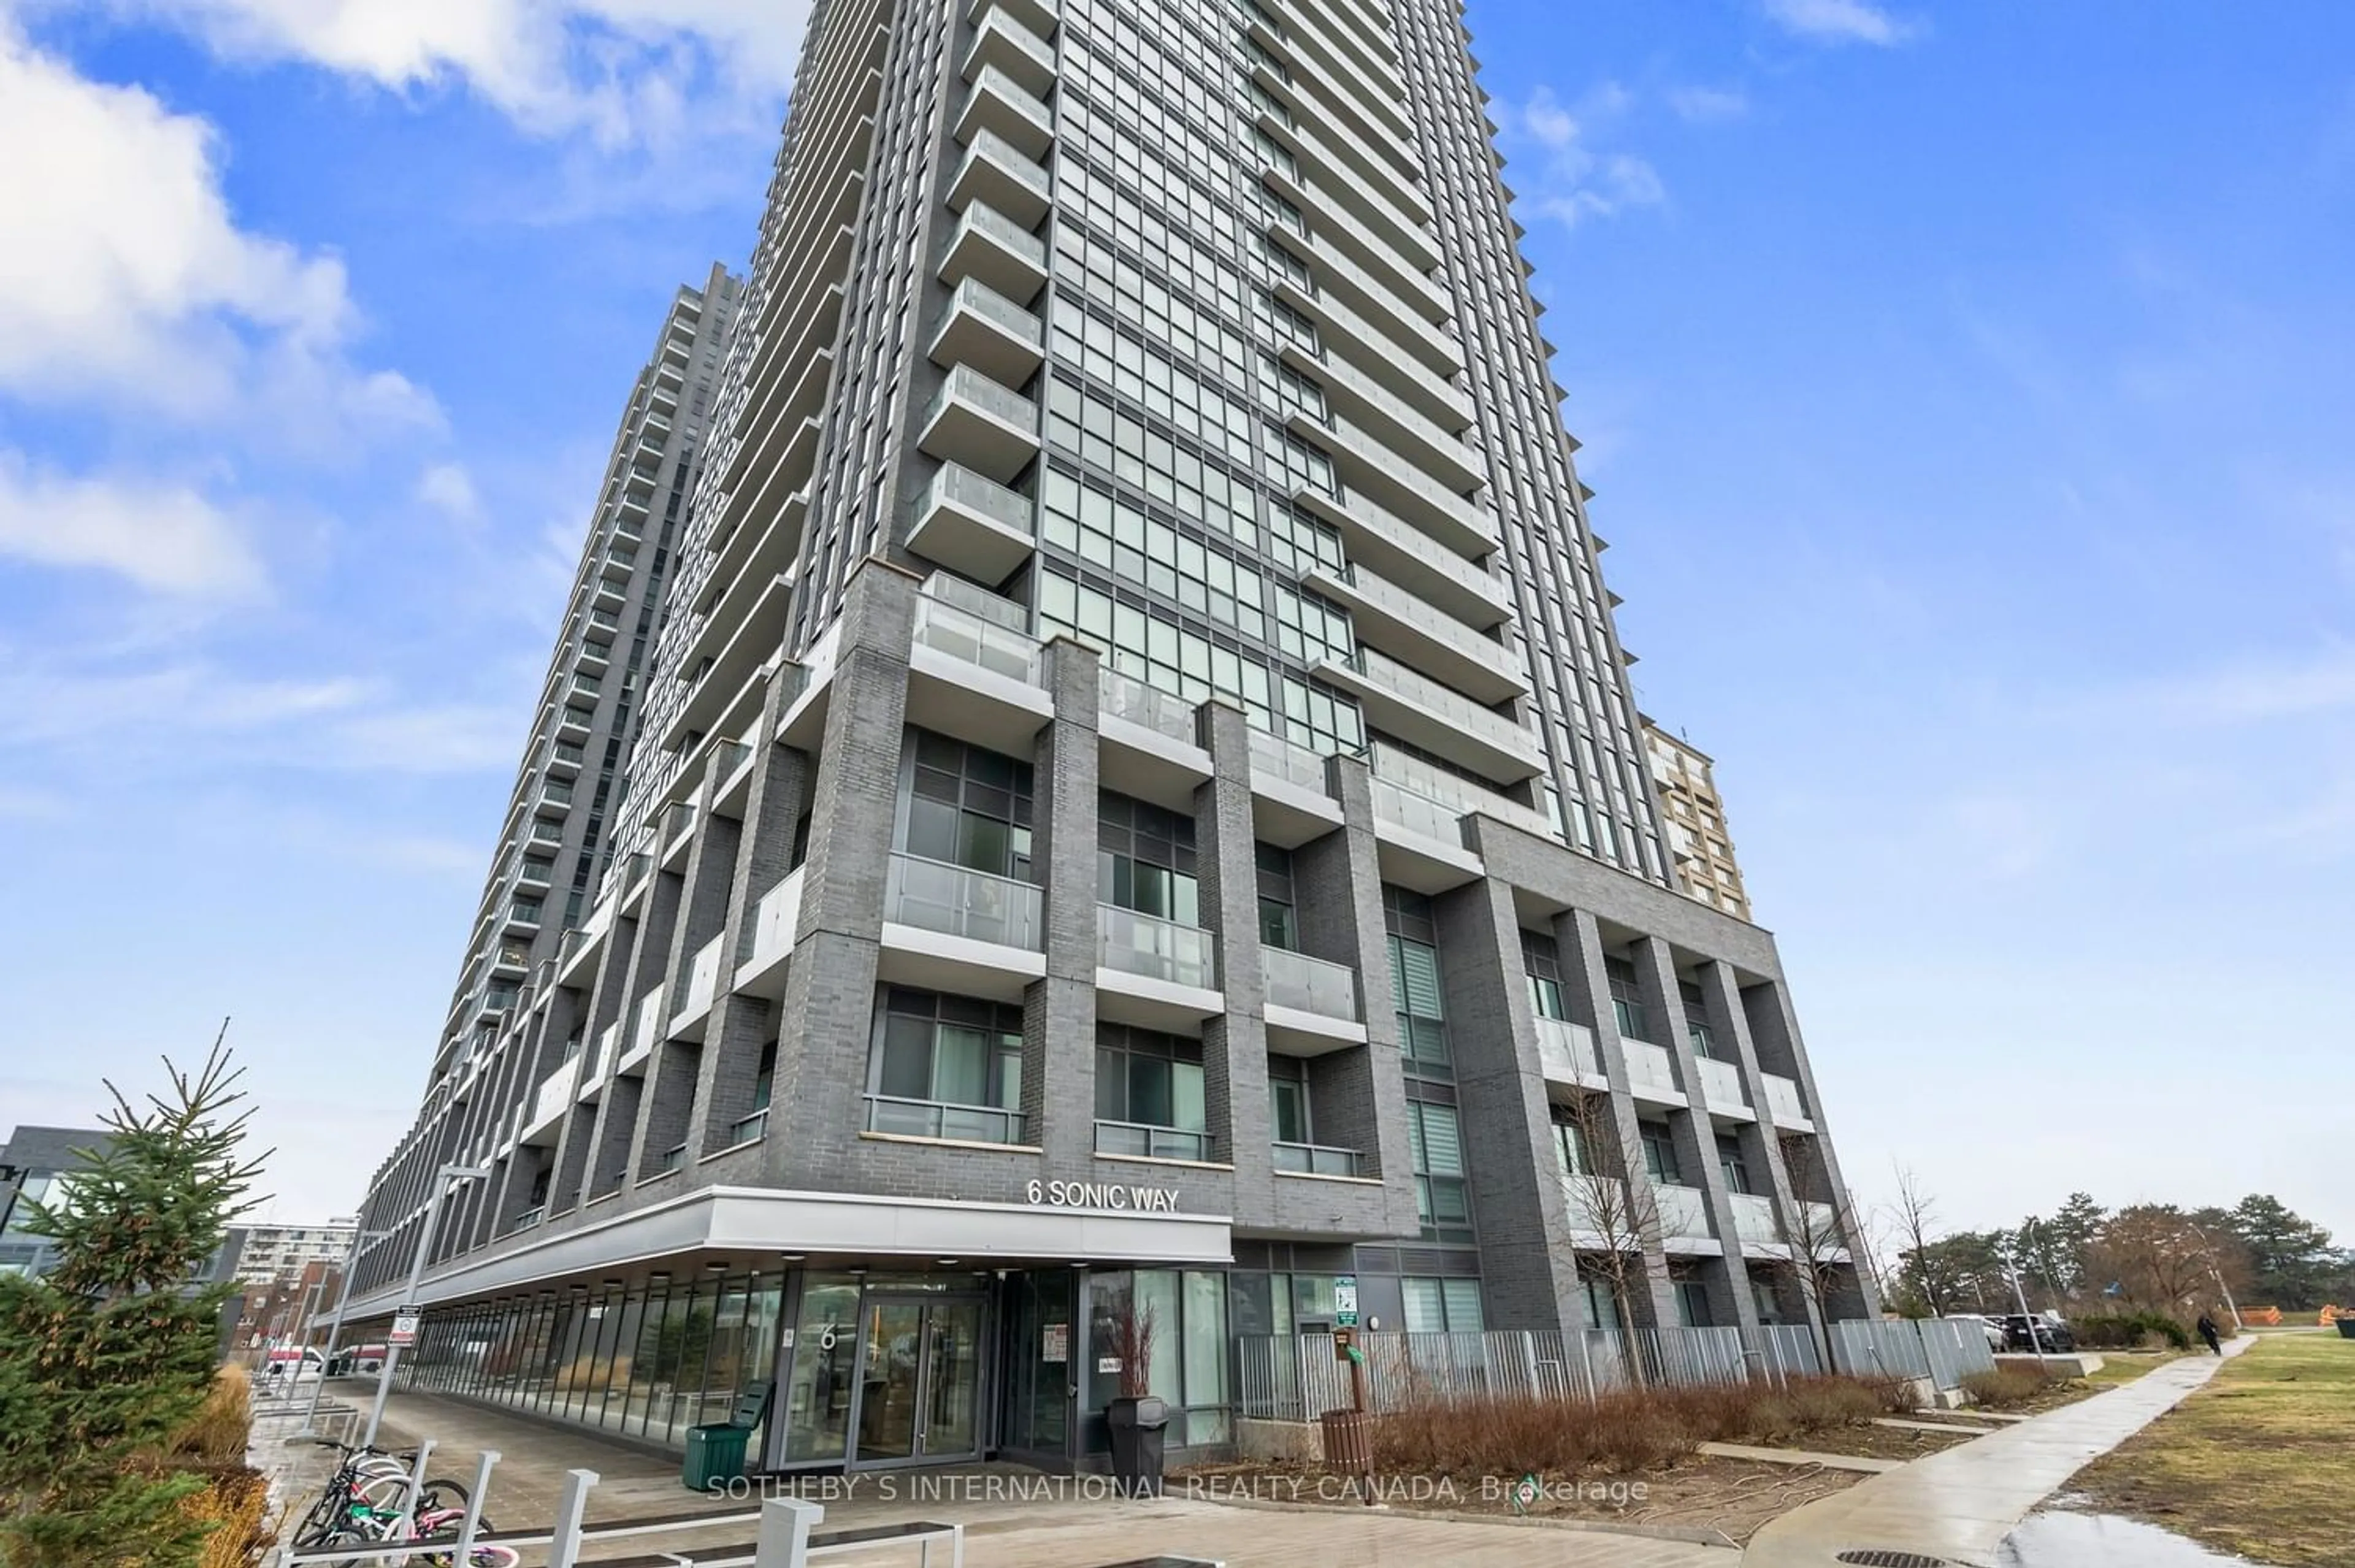 A pic from exterior of the house or condo for 6 Sonic Way #302, Toronto Ontario M3C 0P1